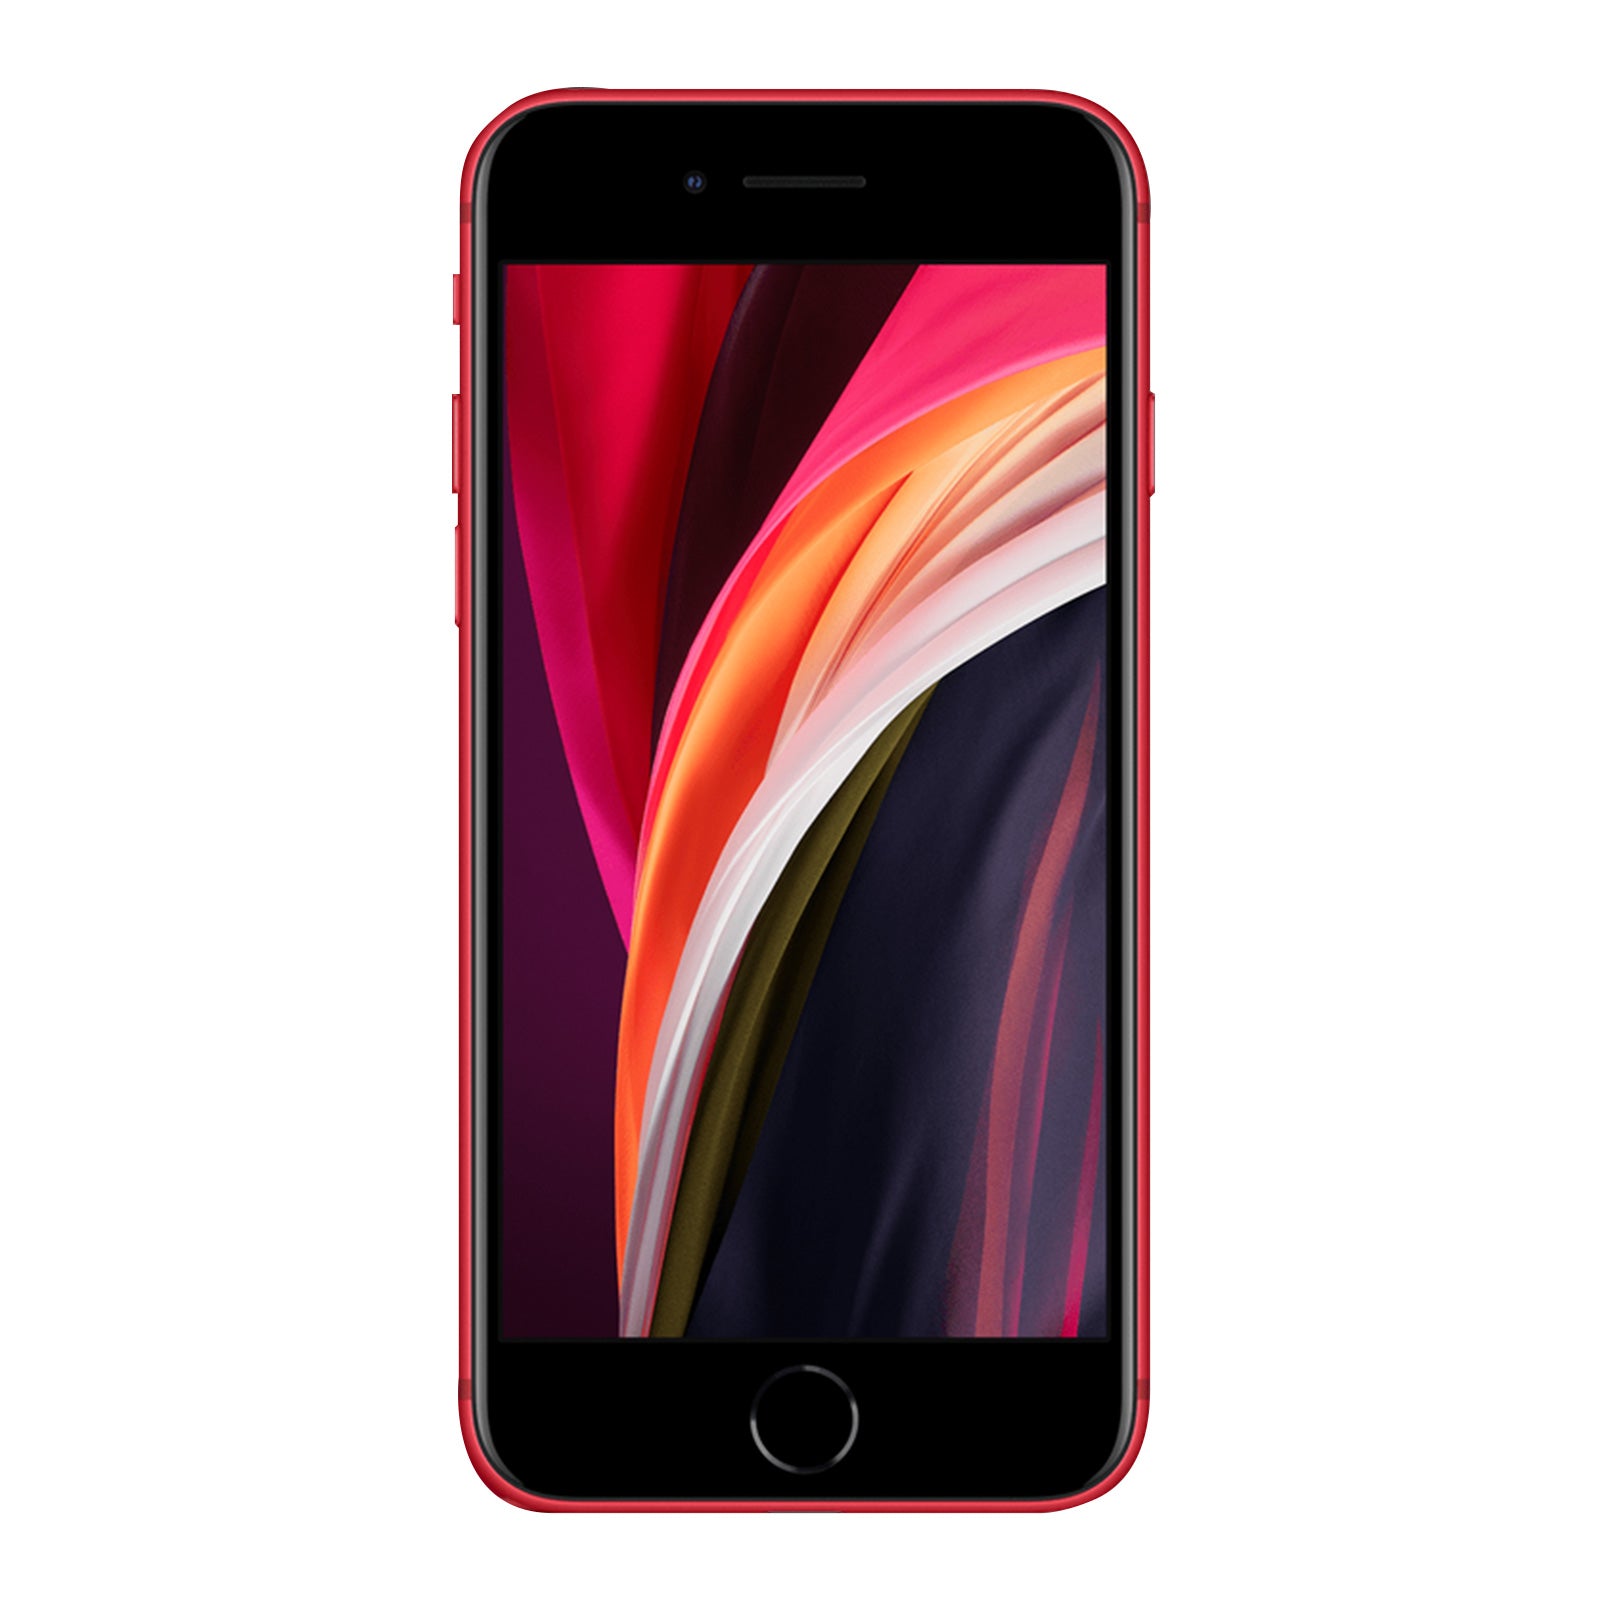 Apple iPhone SE 2nd Gen 64GB Product Red Pristine Sprint